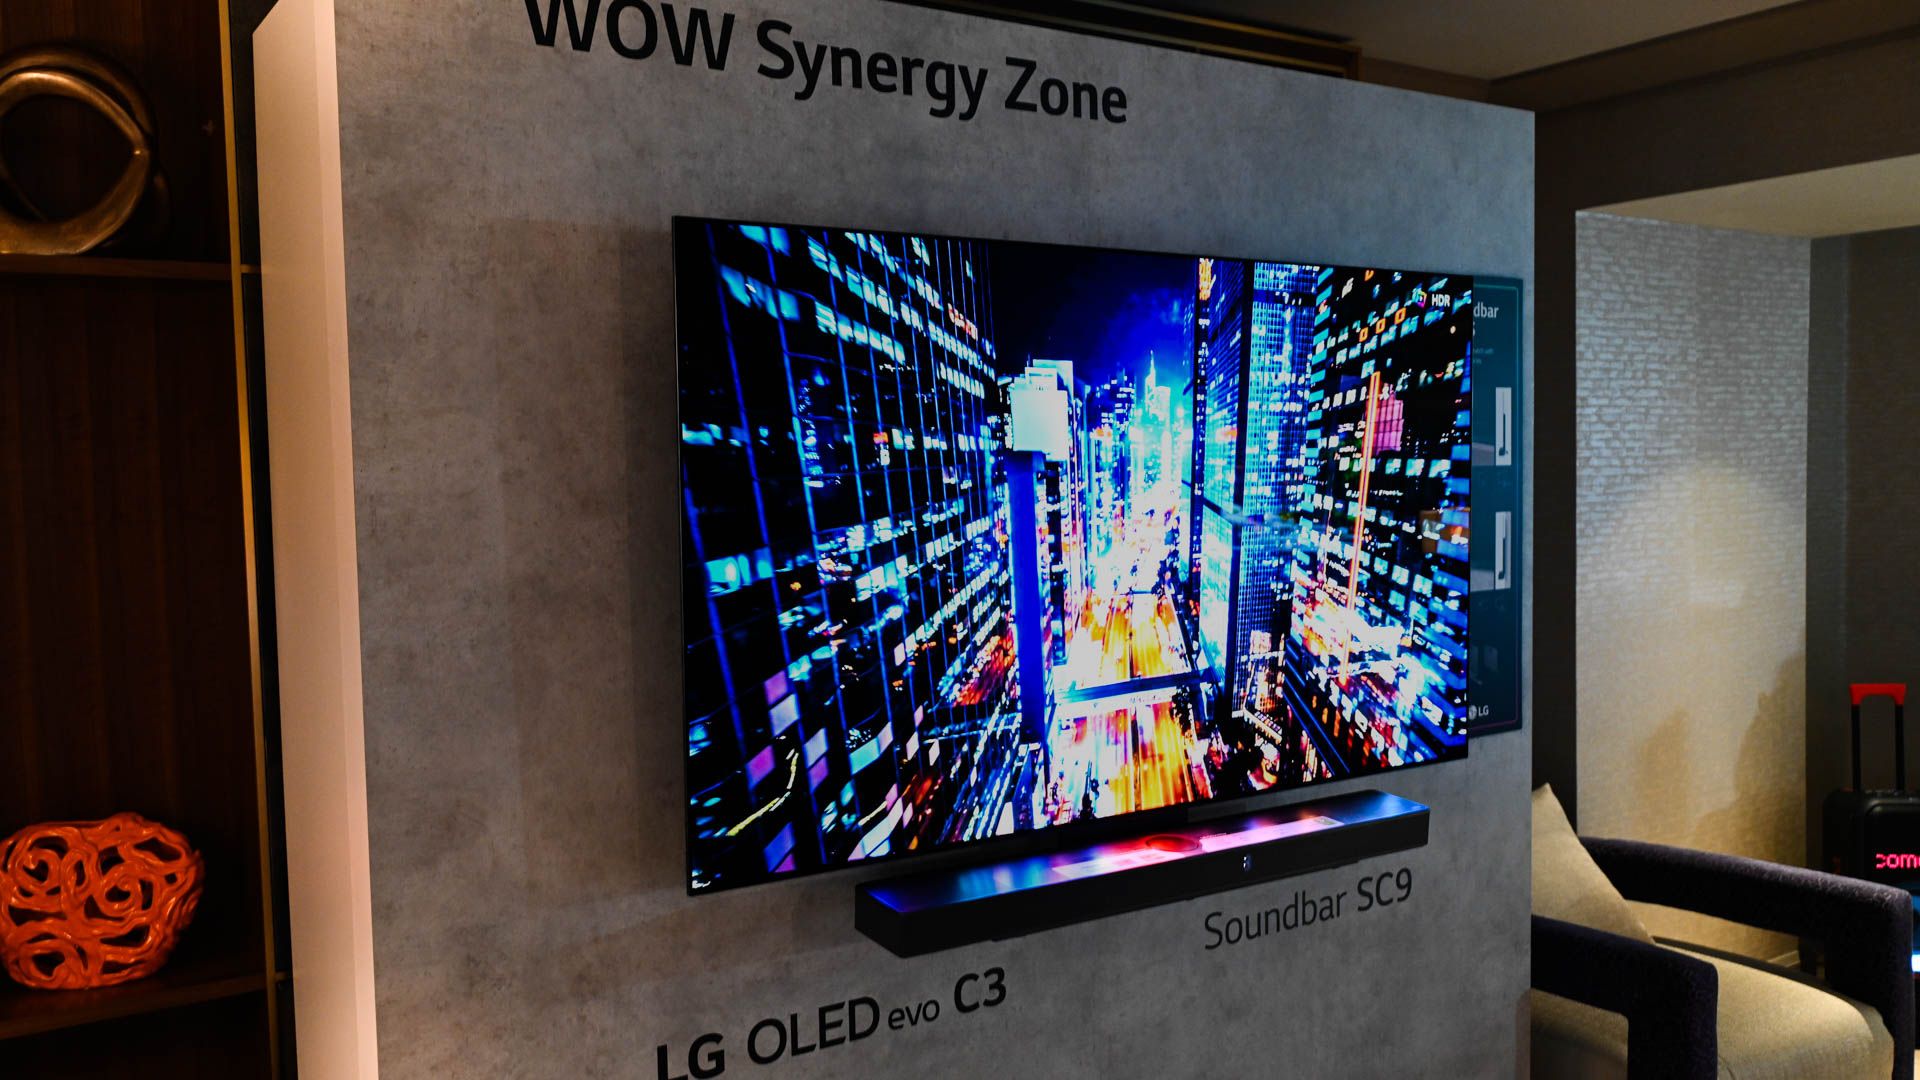 WOW Synergy Zone demonstrated with an LG OLED evo c3 attached Soundbar SC9.